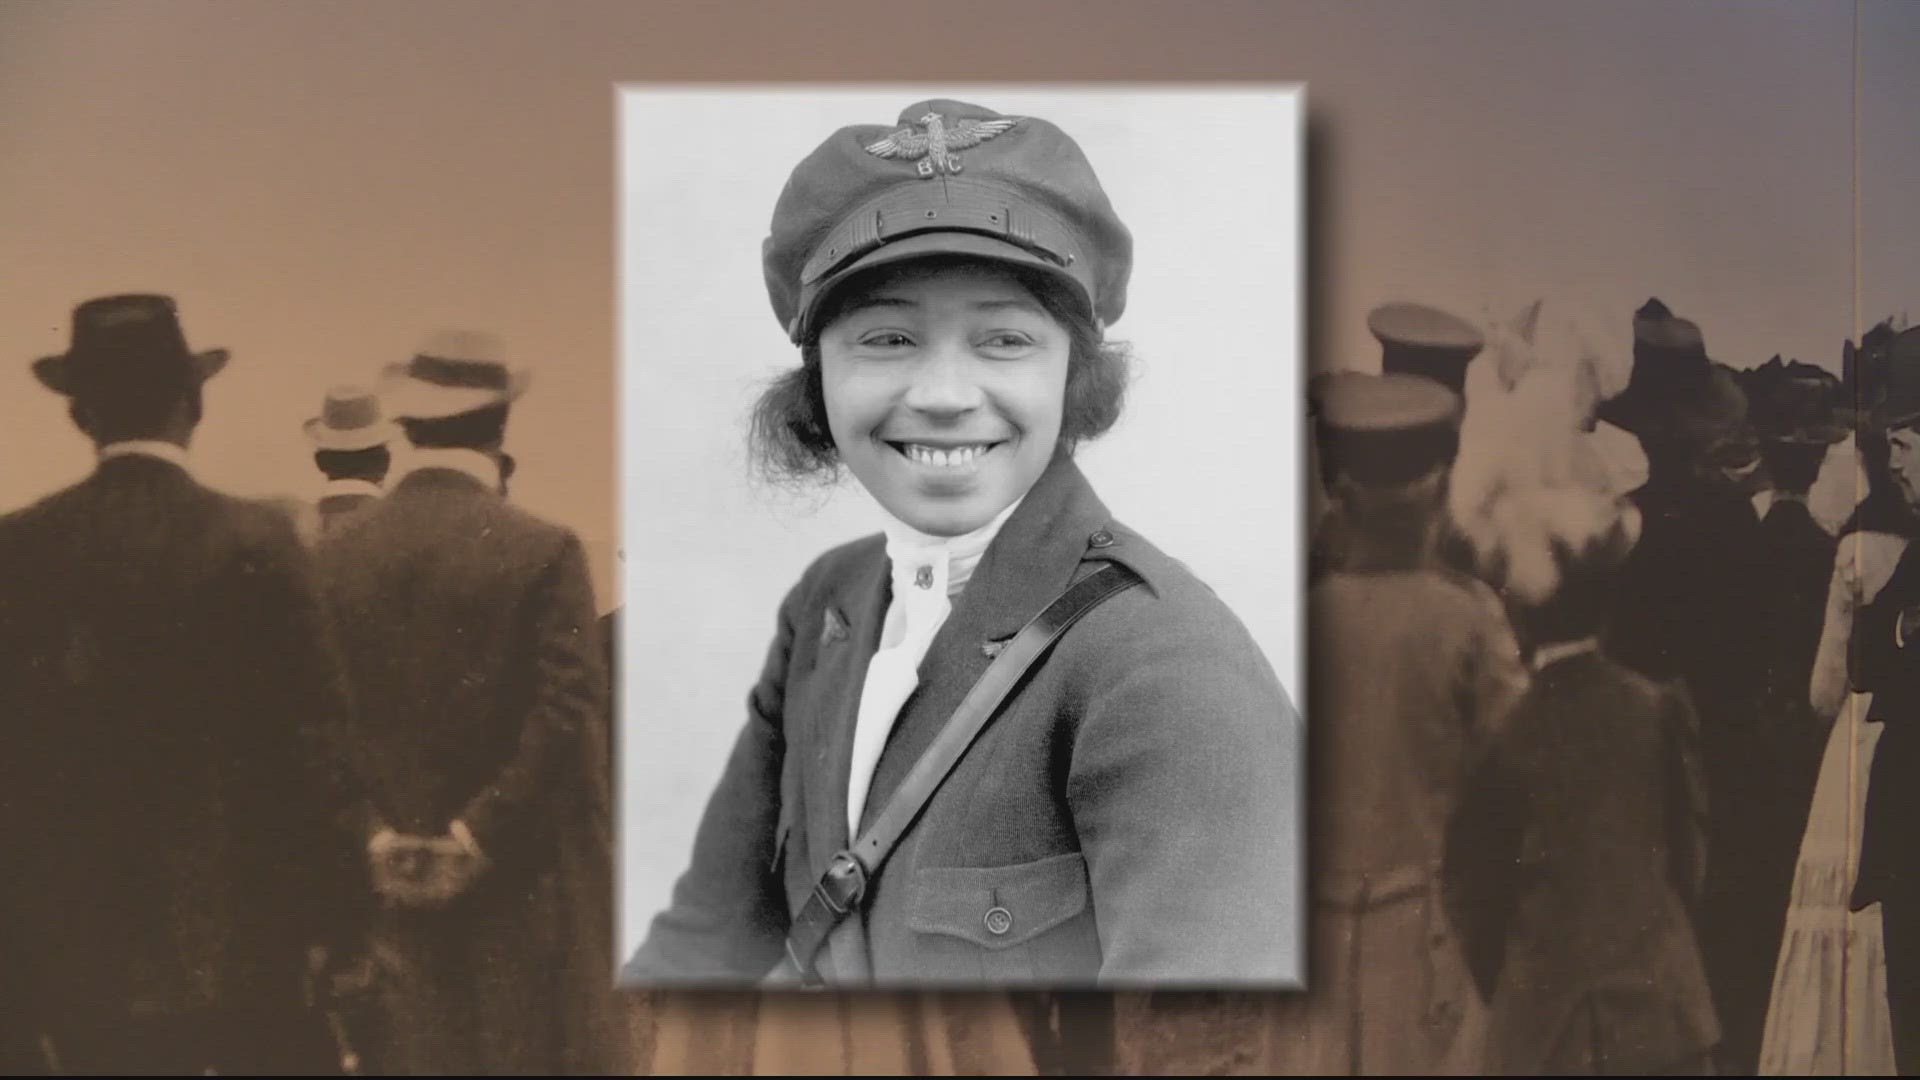 Bessie Coleman was a groundbreaking pilot, but she's not a household name.